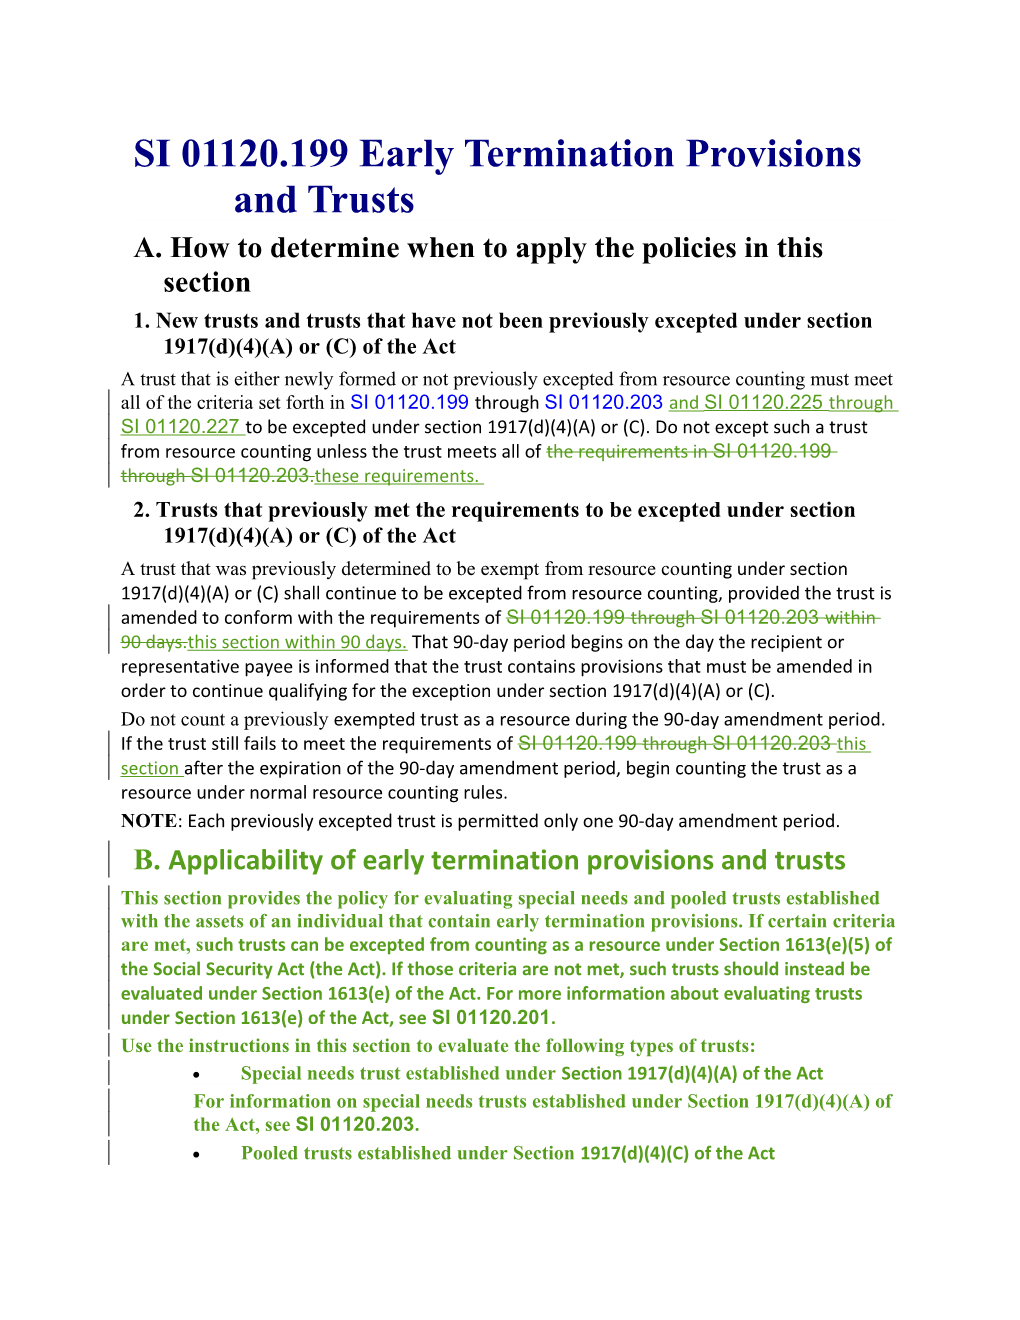 SI 01120.199 Early Termination Provisions and Trusts